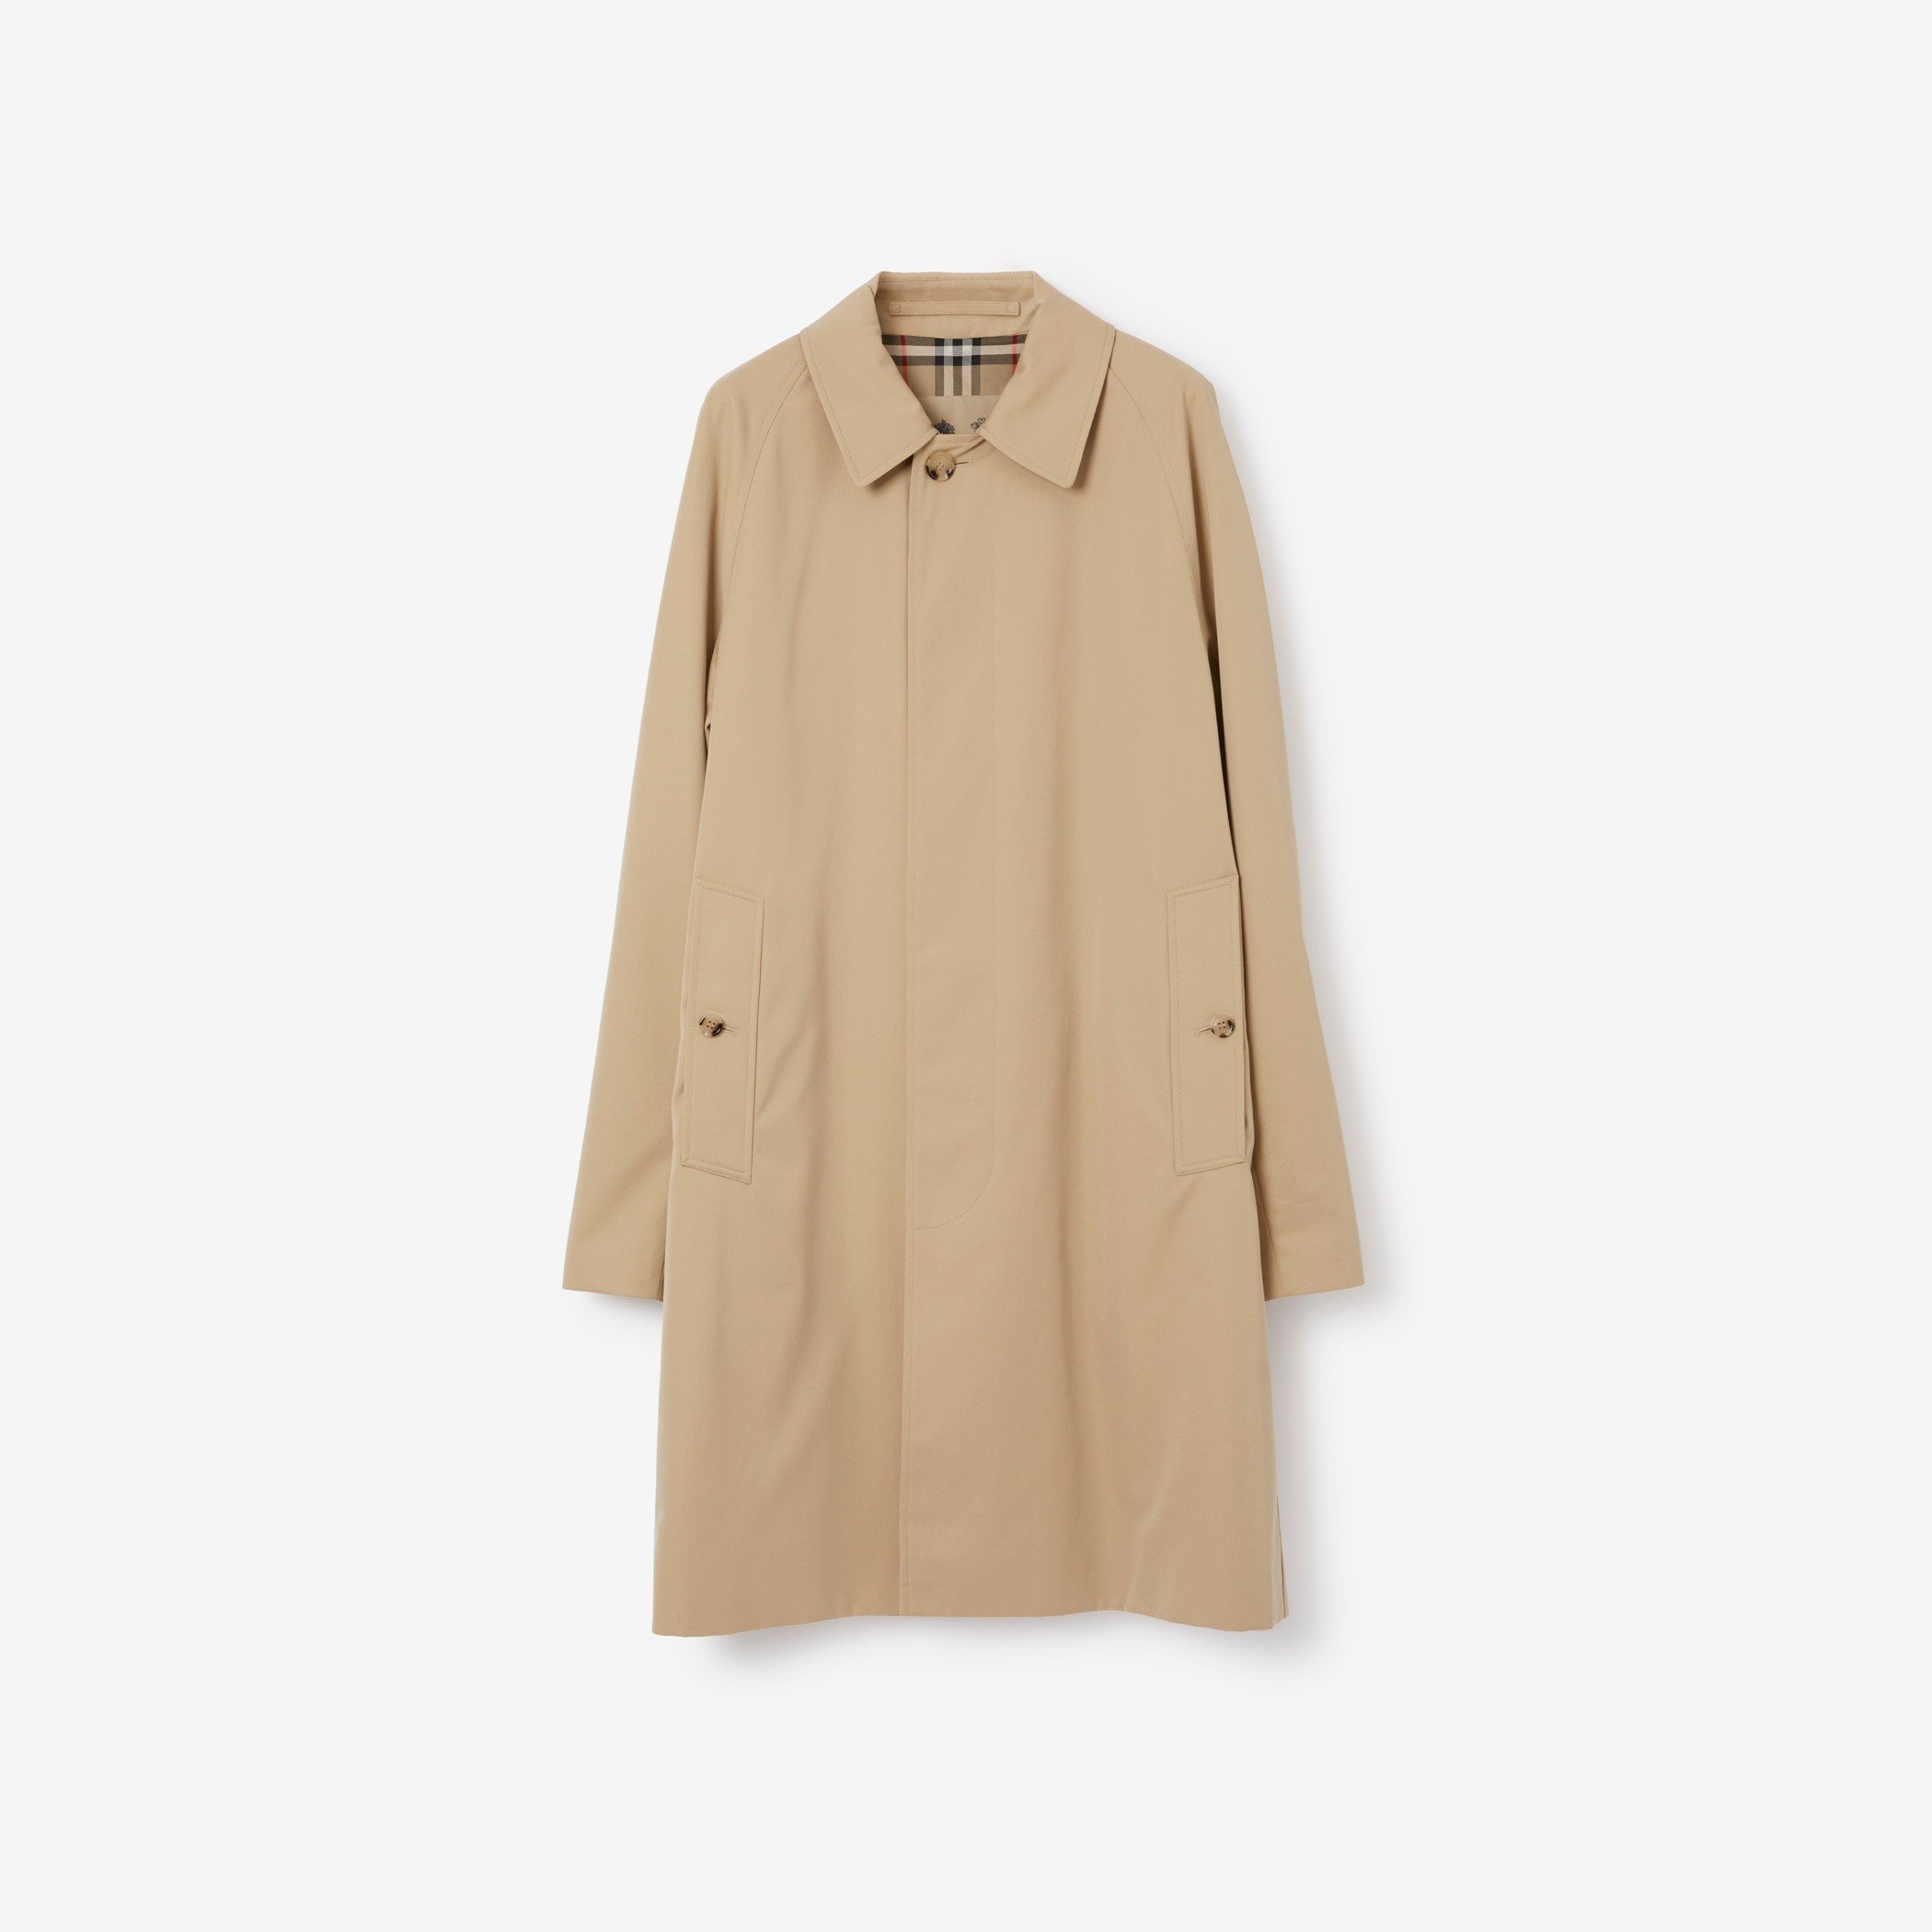 Sophisticated outerwear - Burberry car coat - £1,590 